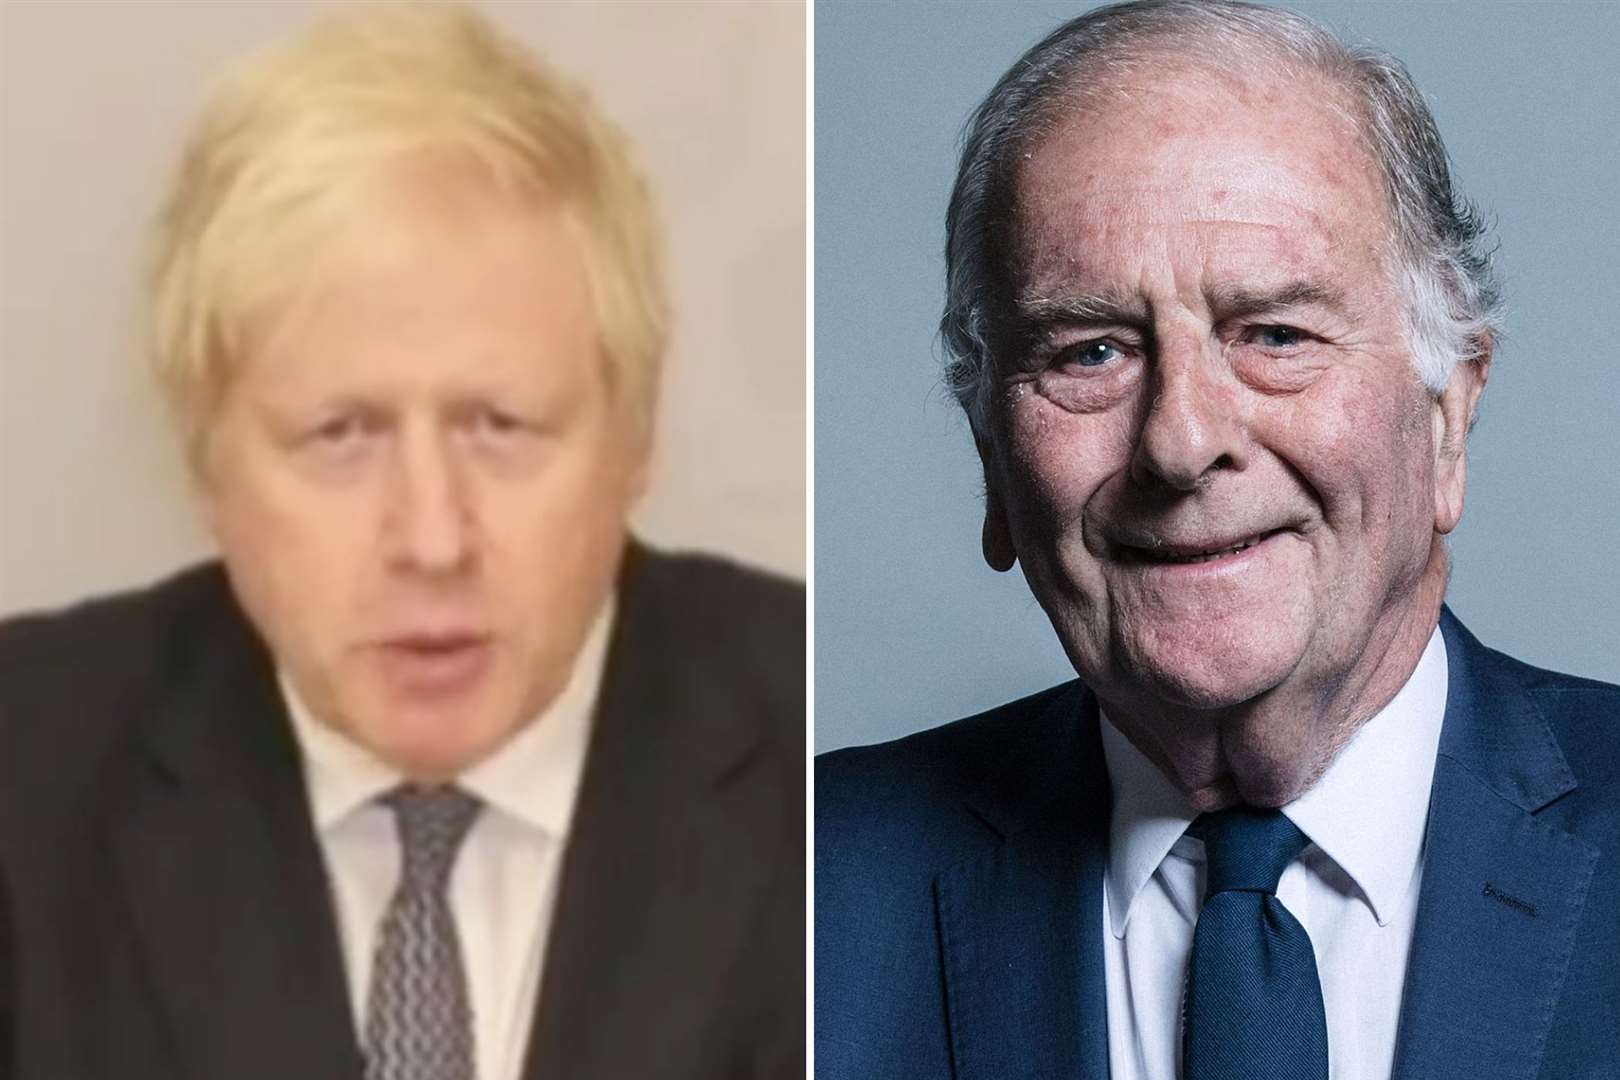 It's fair to say North Thanet MP Sir Roger Gale is not one of Boris Johnson's biggest fans